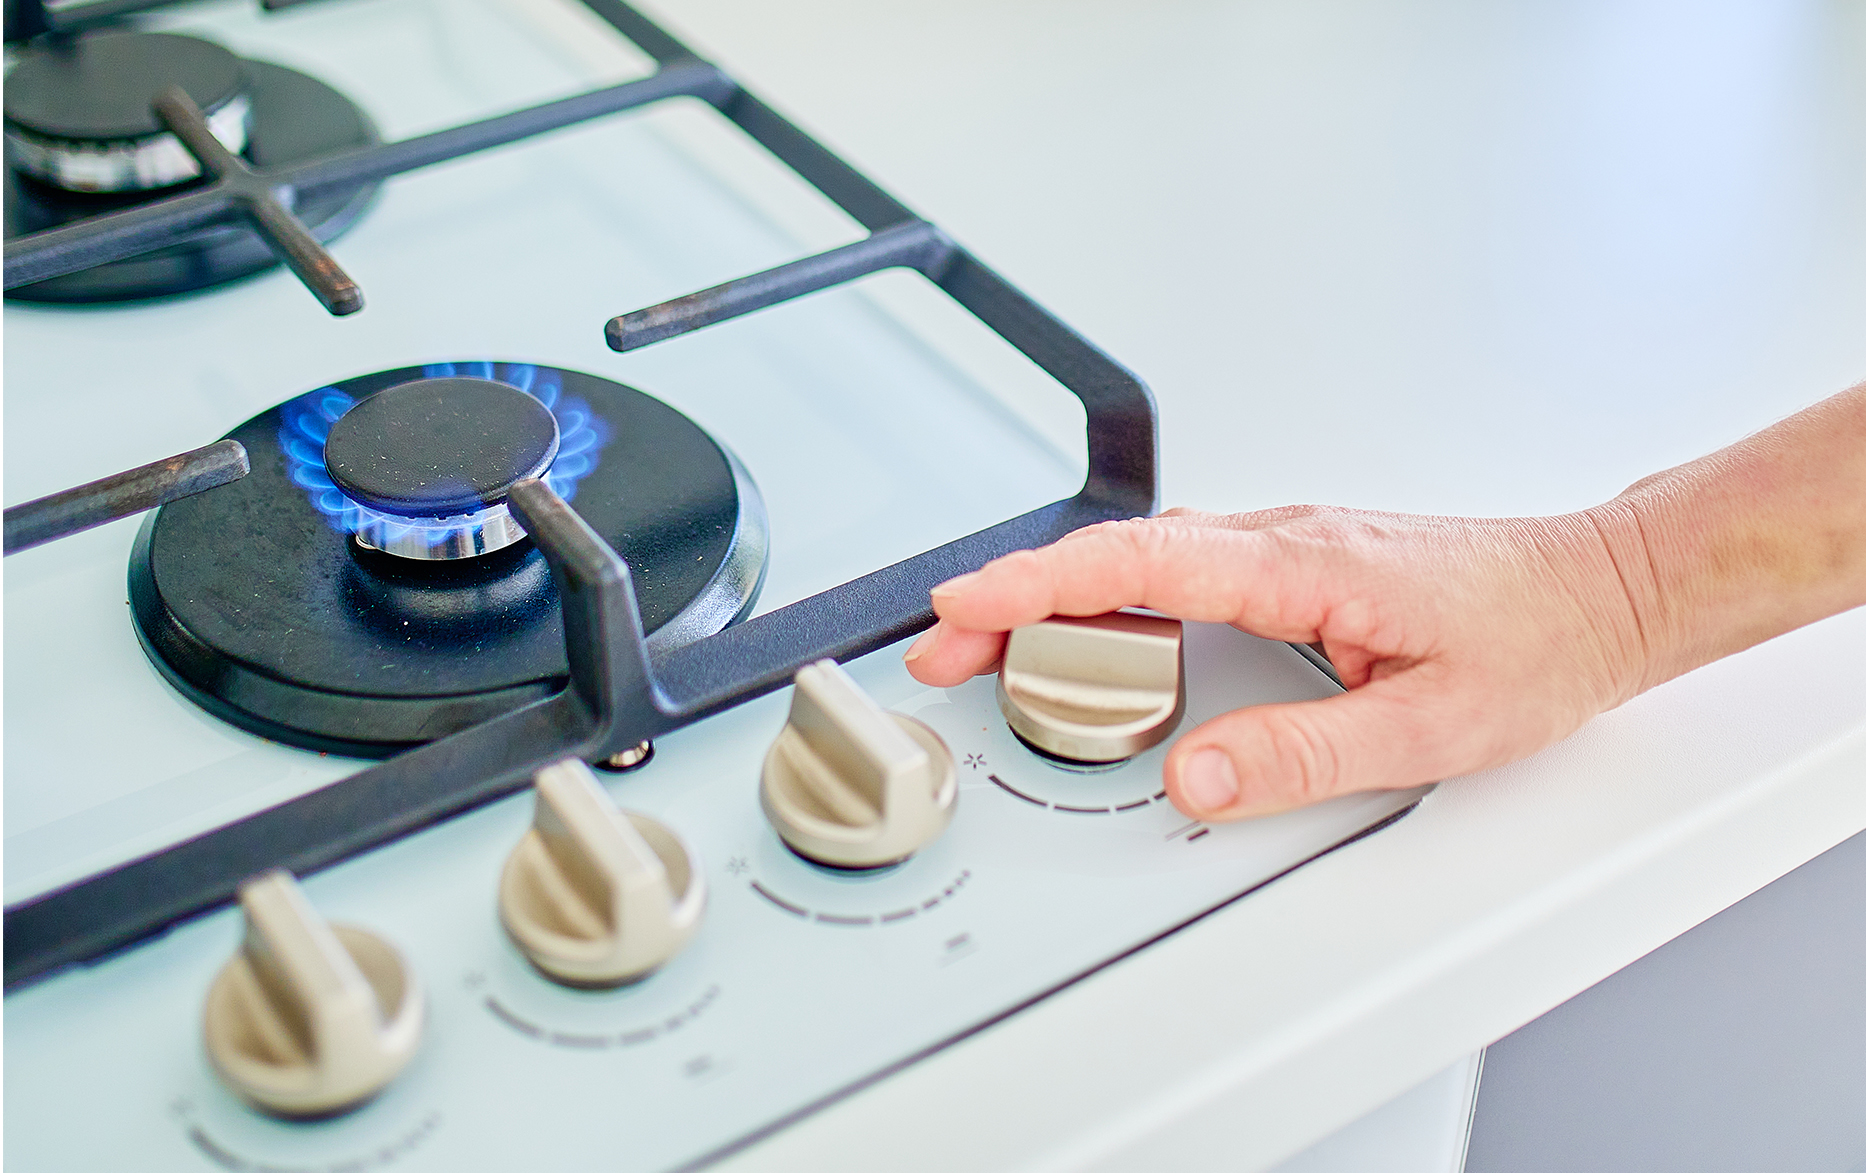 How to Clean a Gas Stove